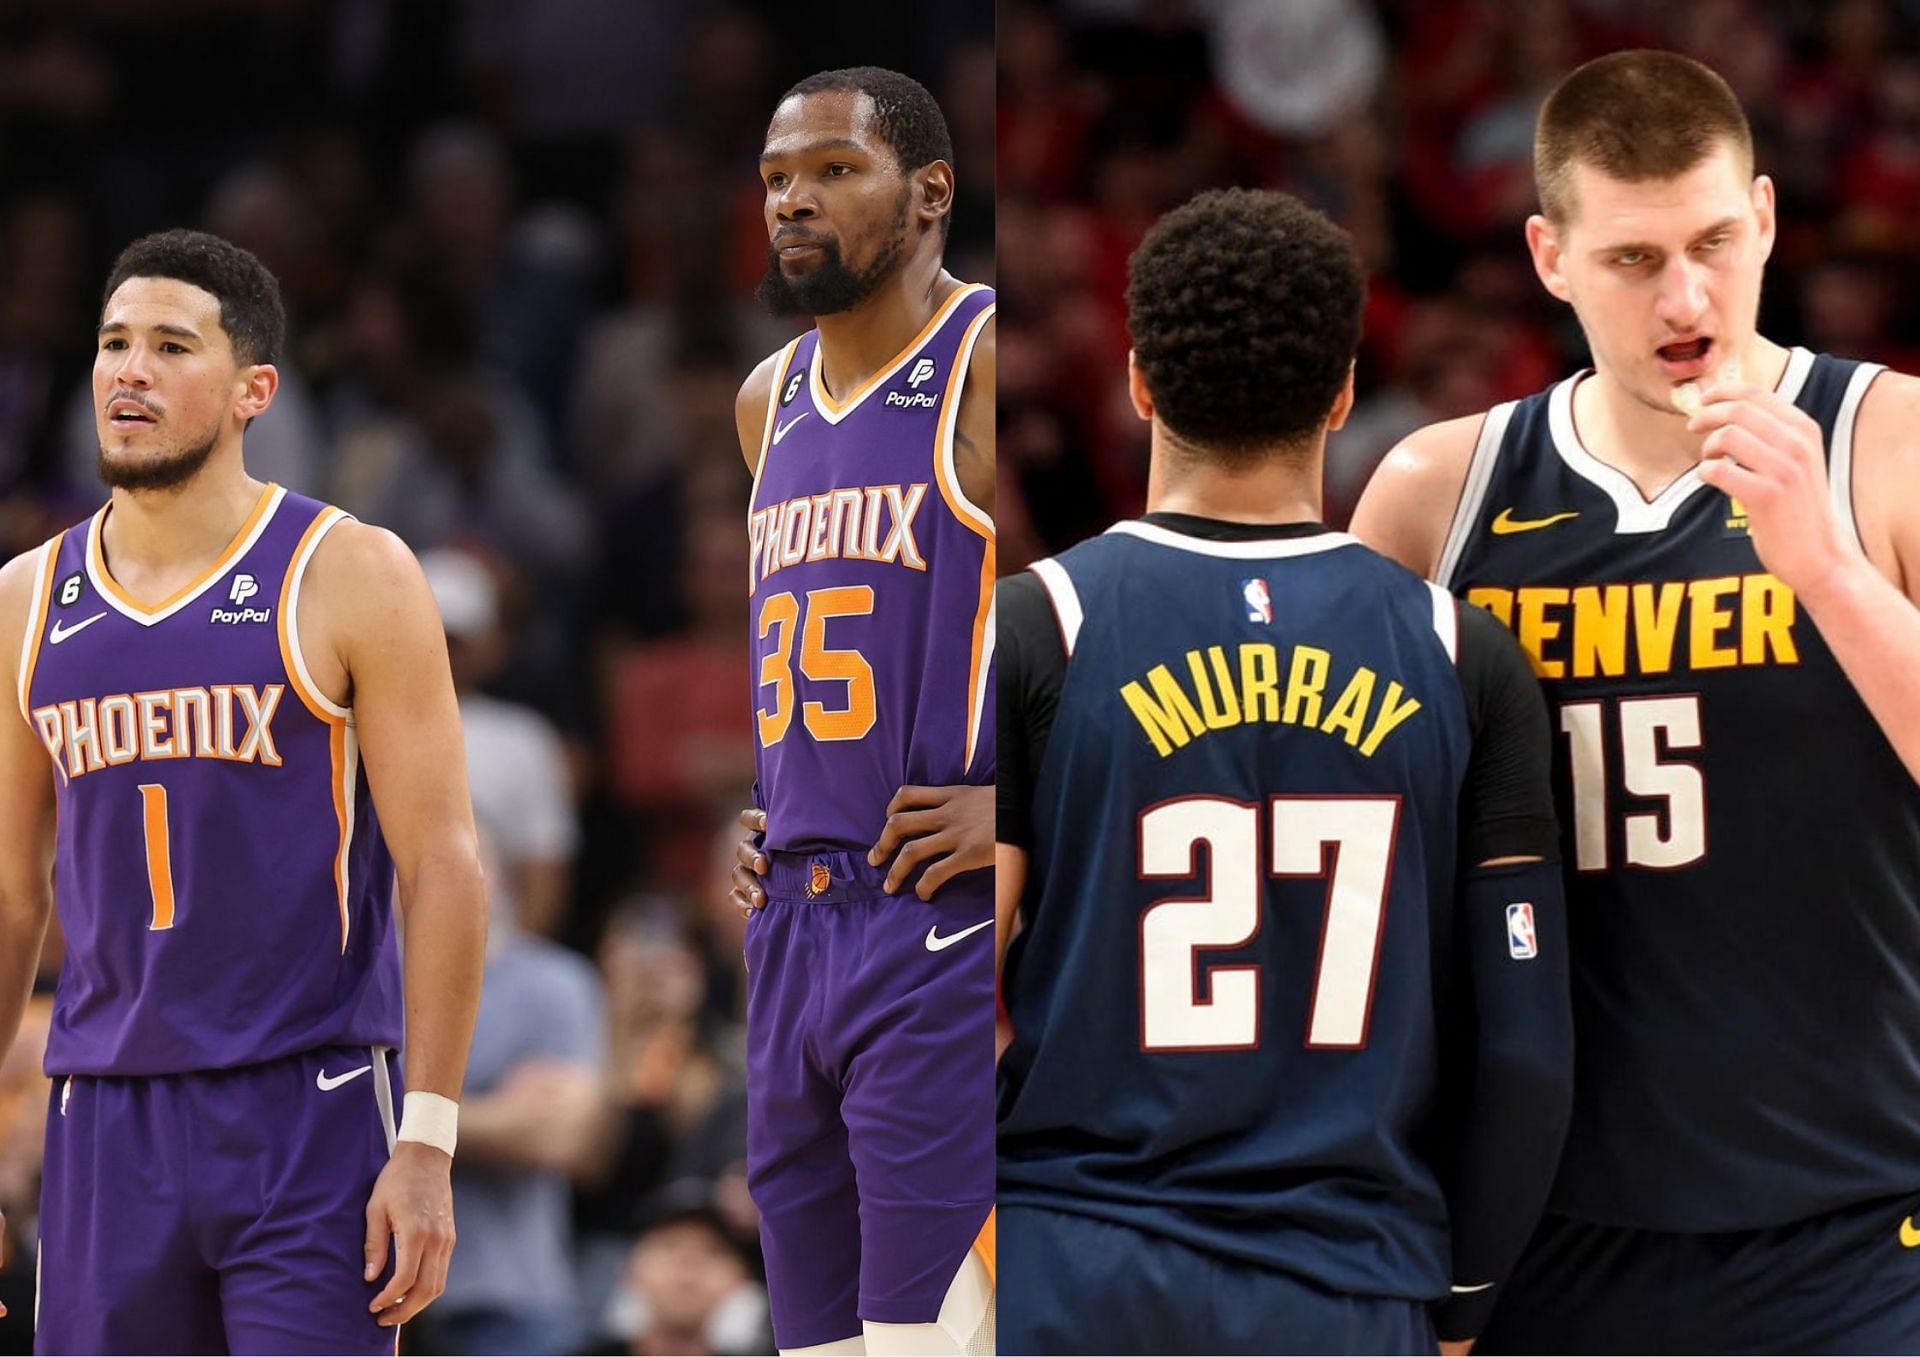 Game 1 of the second-round series between the Phoenix Suns and Denver Nuggets will be on Saturday night.